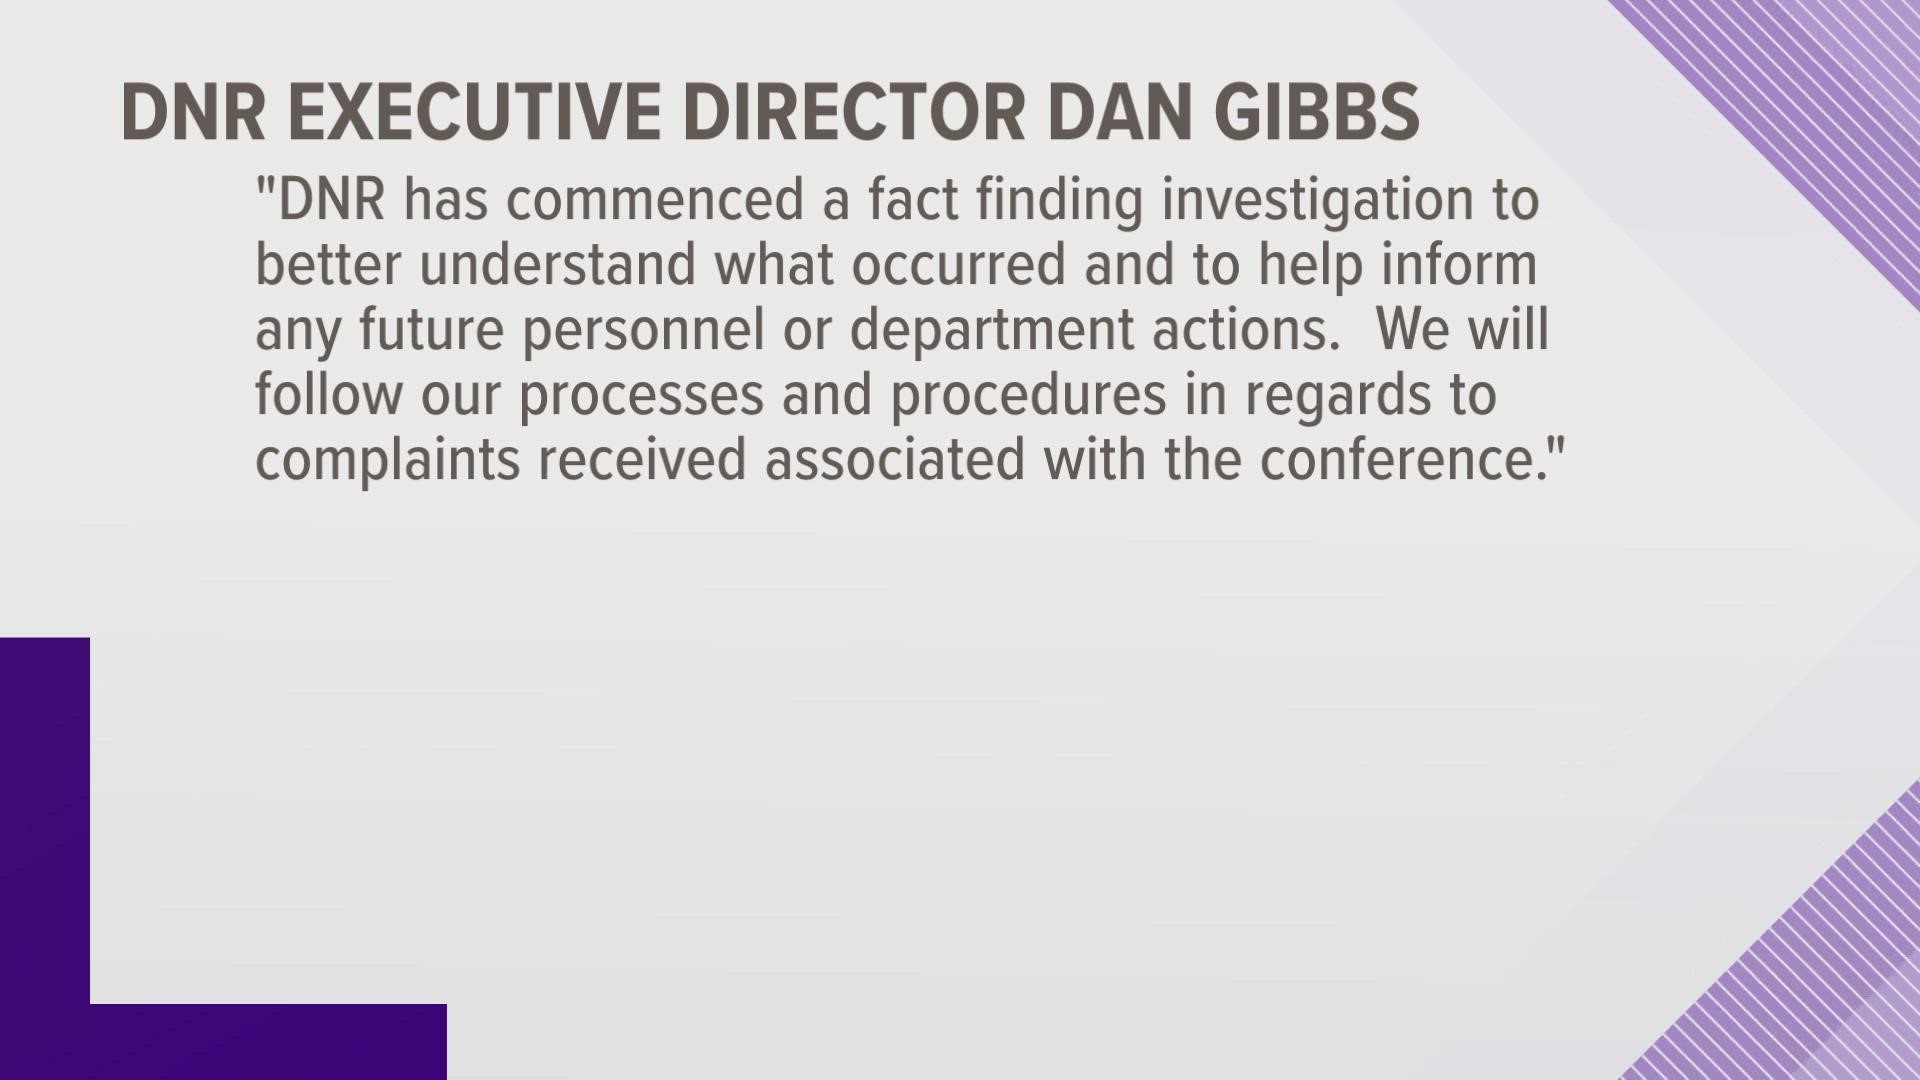 Dan Prenzlow has been put on administrative leave after the DNR received several complaints about inappropriate comments and interactions at a conference.